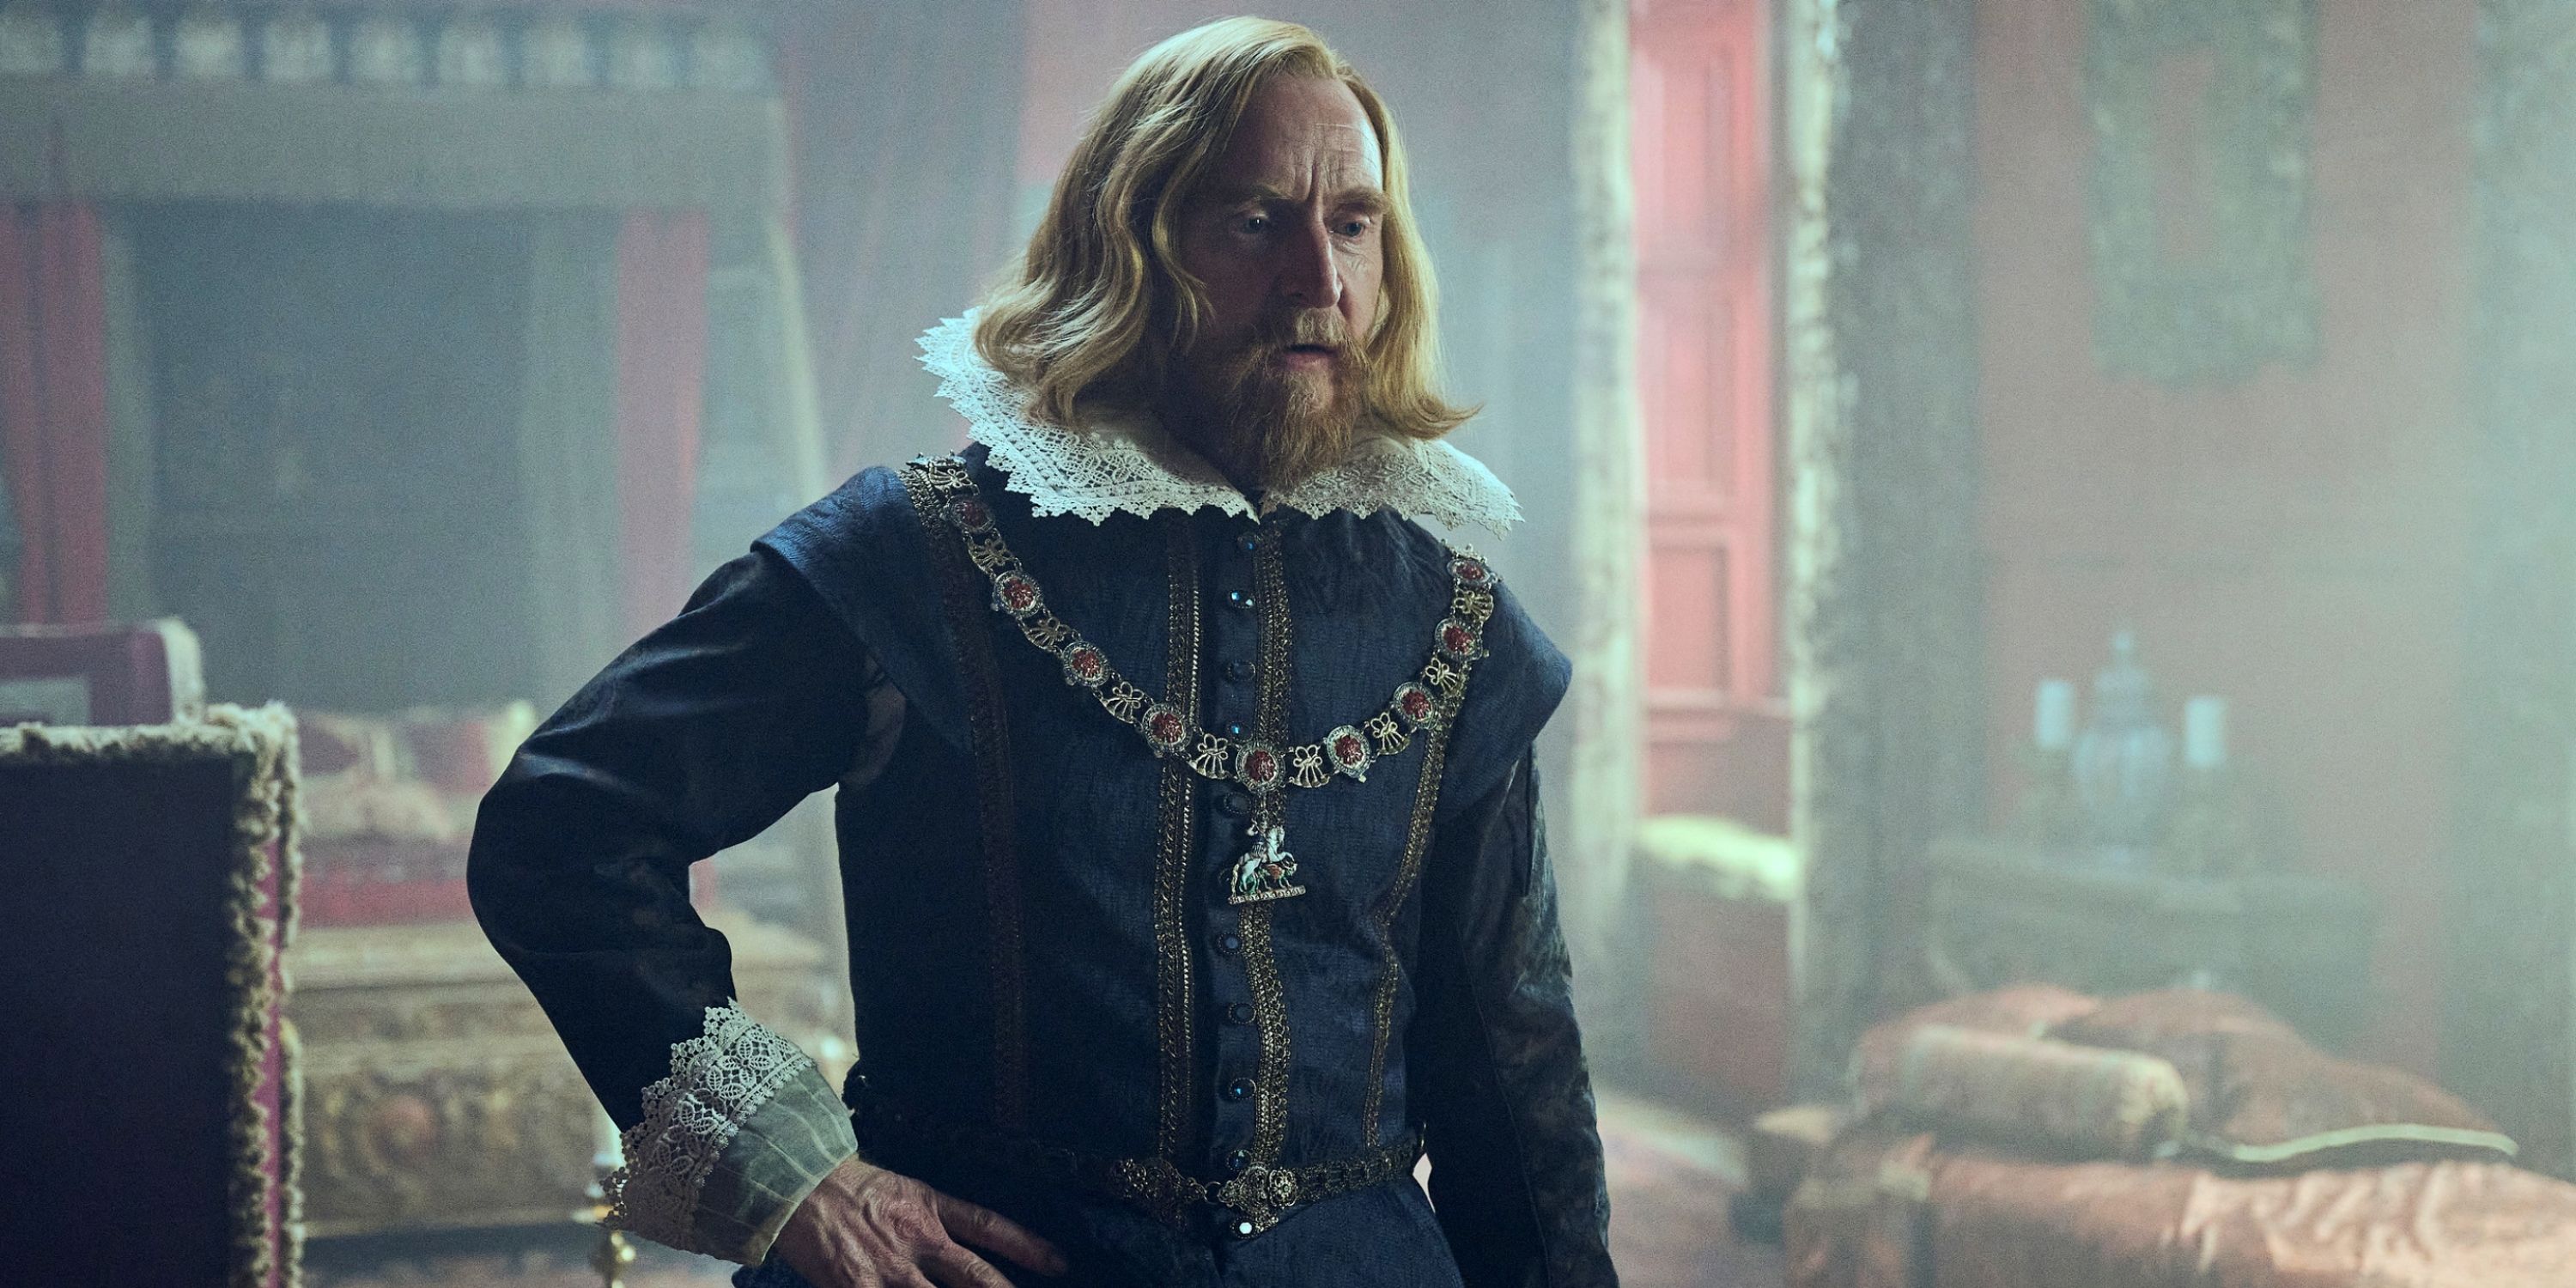 Tony Curran as King James dressed in blue with white lace collar and cuffs in Episode 5 of Mary & George